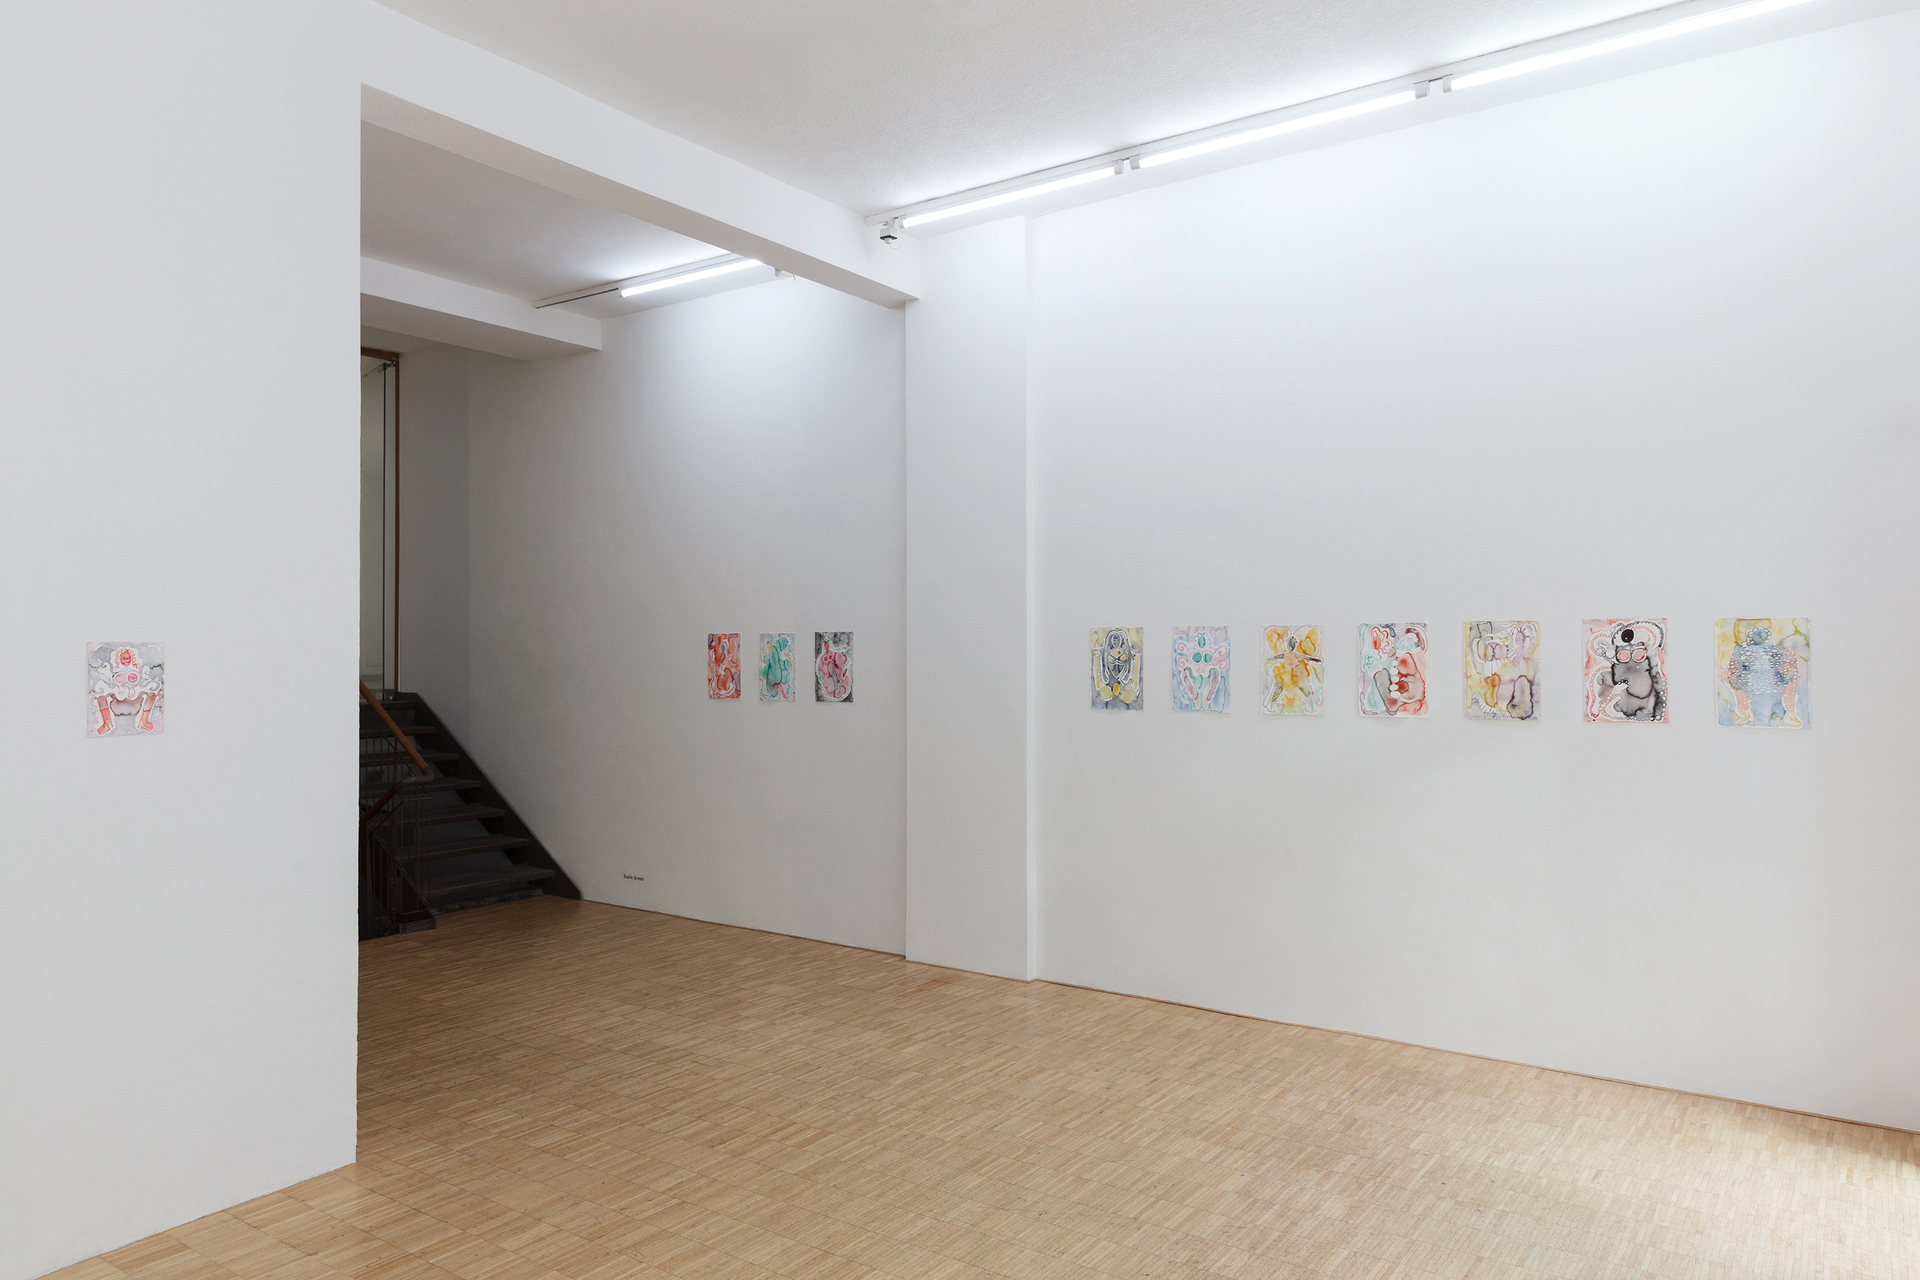 Exhibition view, Susie Green 'Susie's Party', 2021, selected watercolours on paper